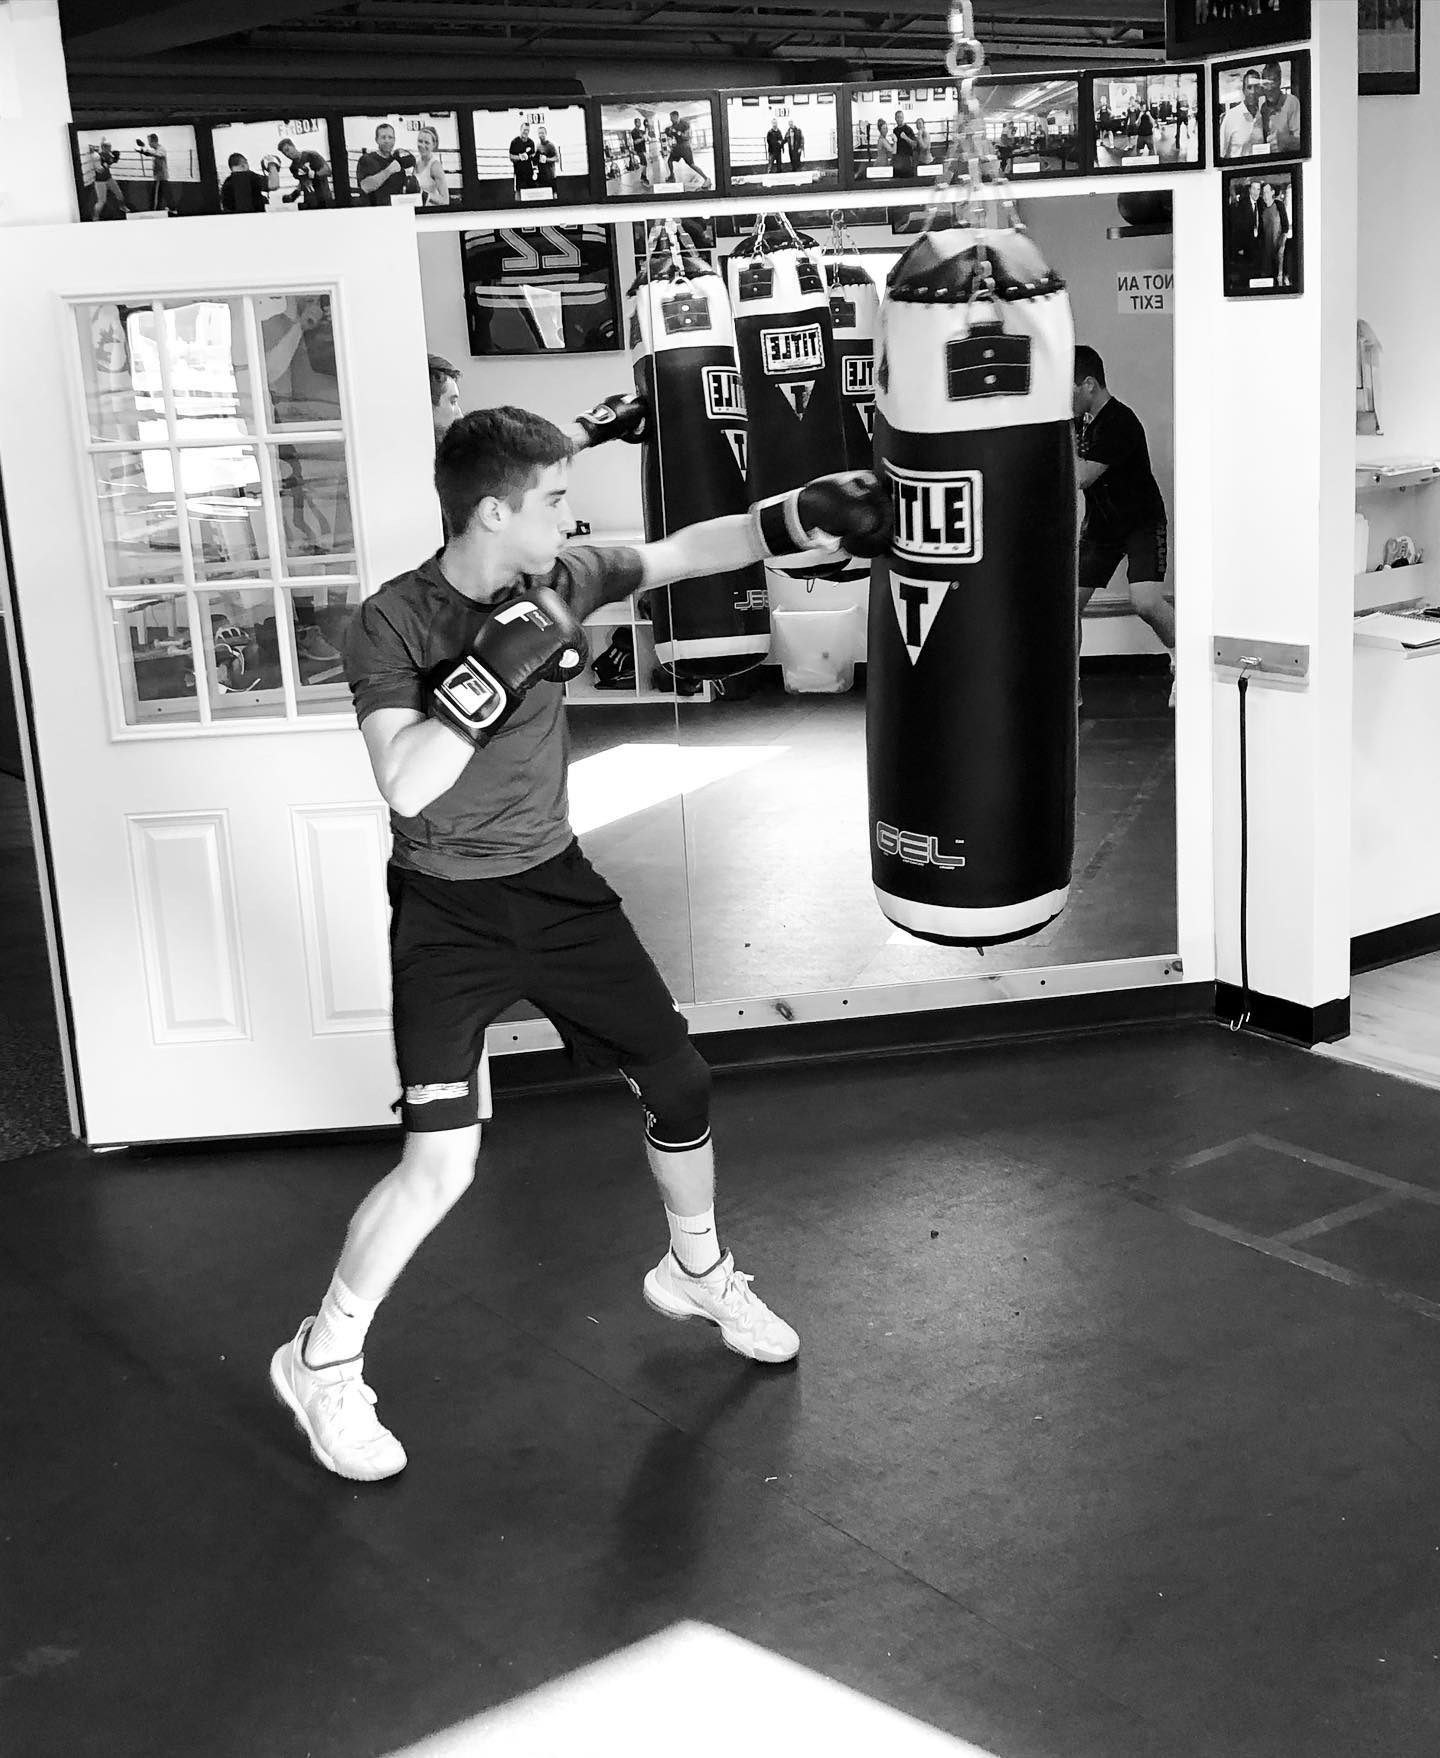 Looking to keep your conditioning up at these pandemic times , Check out a Free Boxing Workout and see the difference on how it’ll make you feel . For more information call /text (781)727-9503 or email fitbox@dedham.com .
@jbmcinerney_